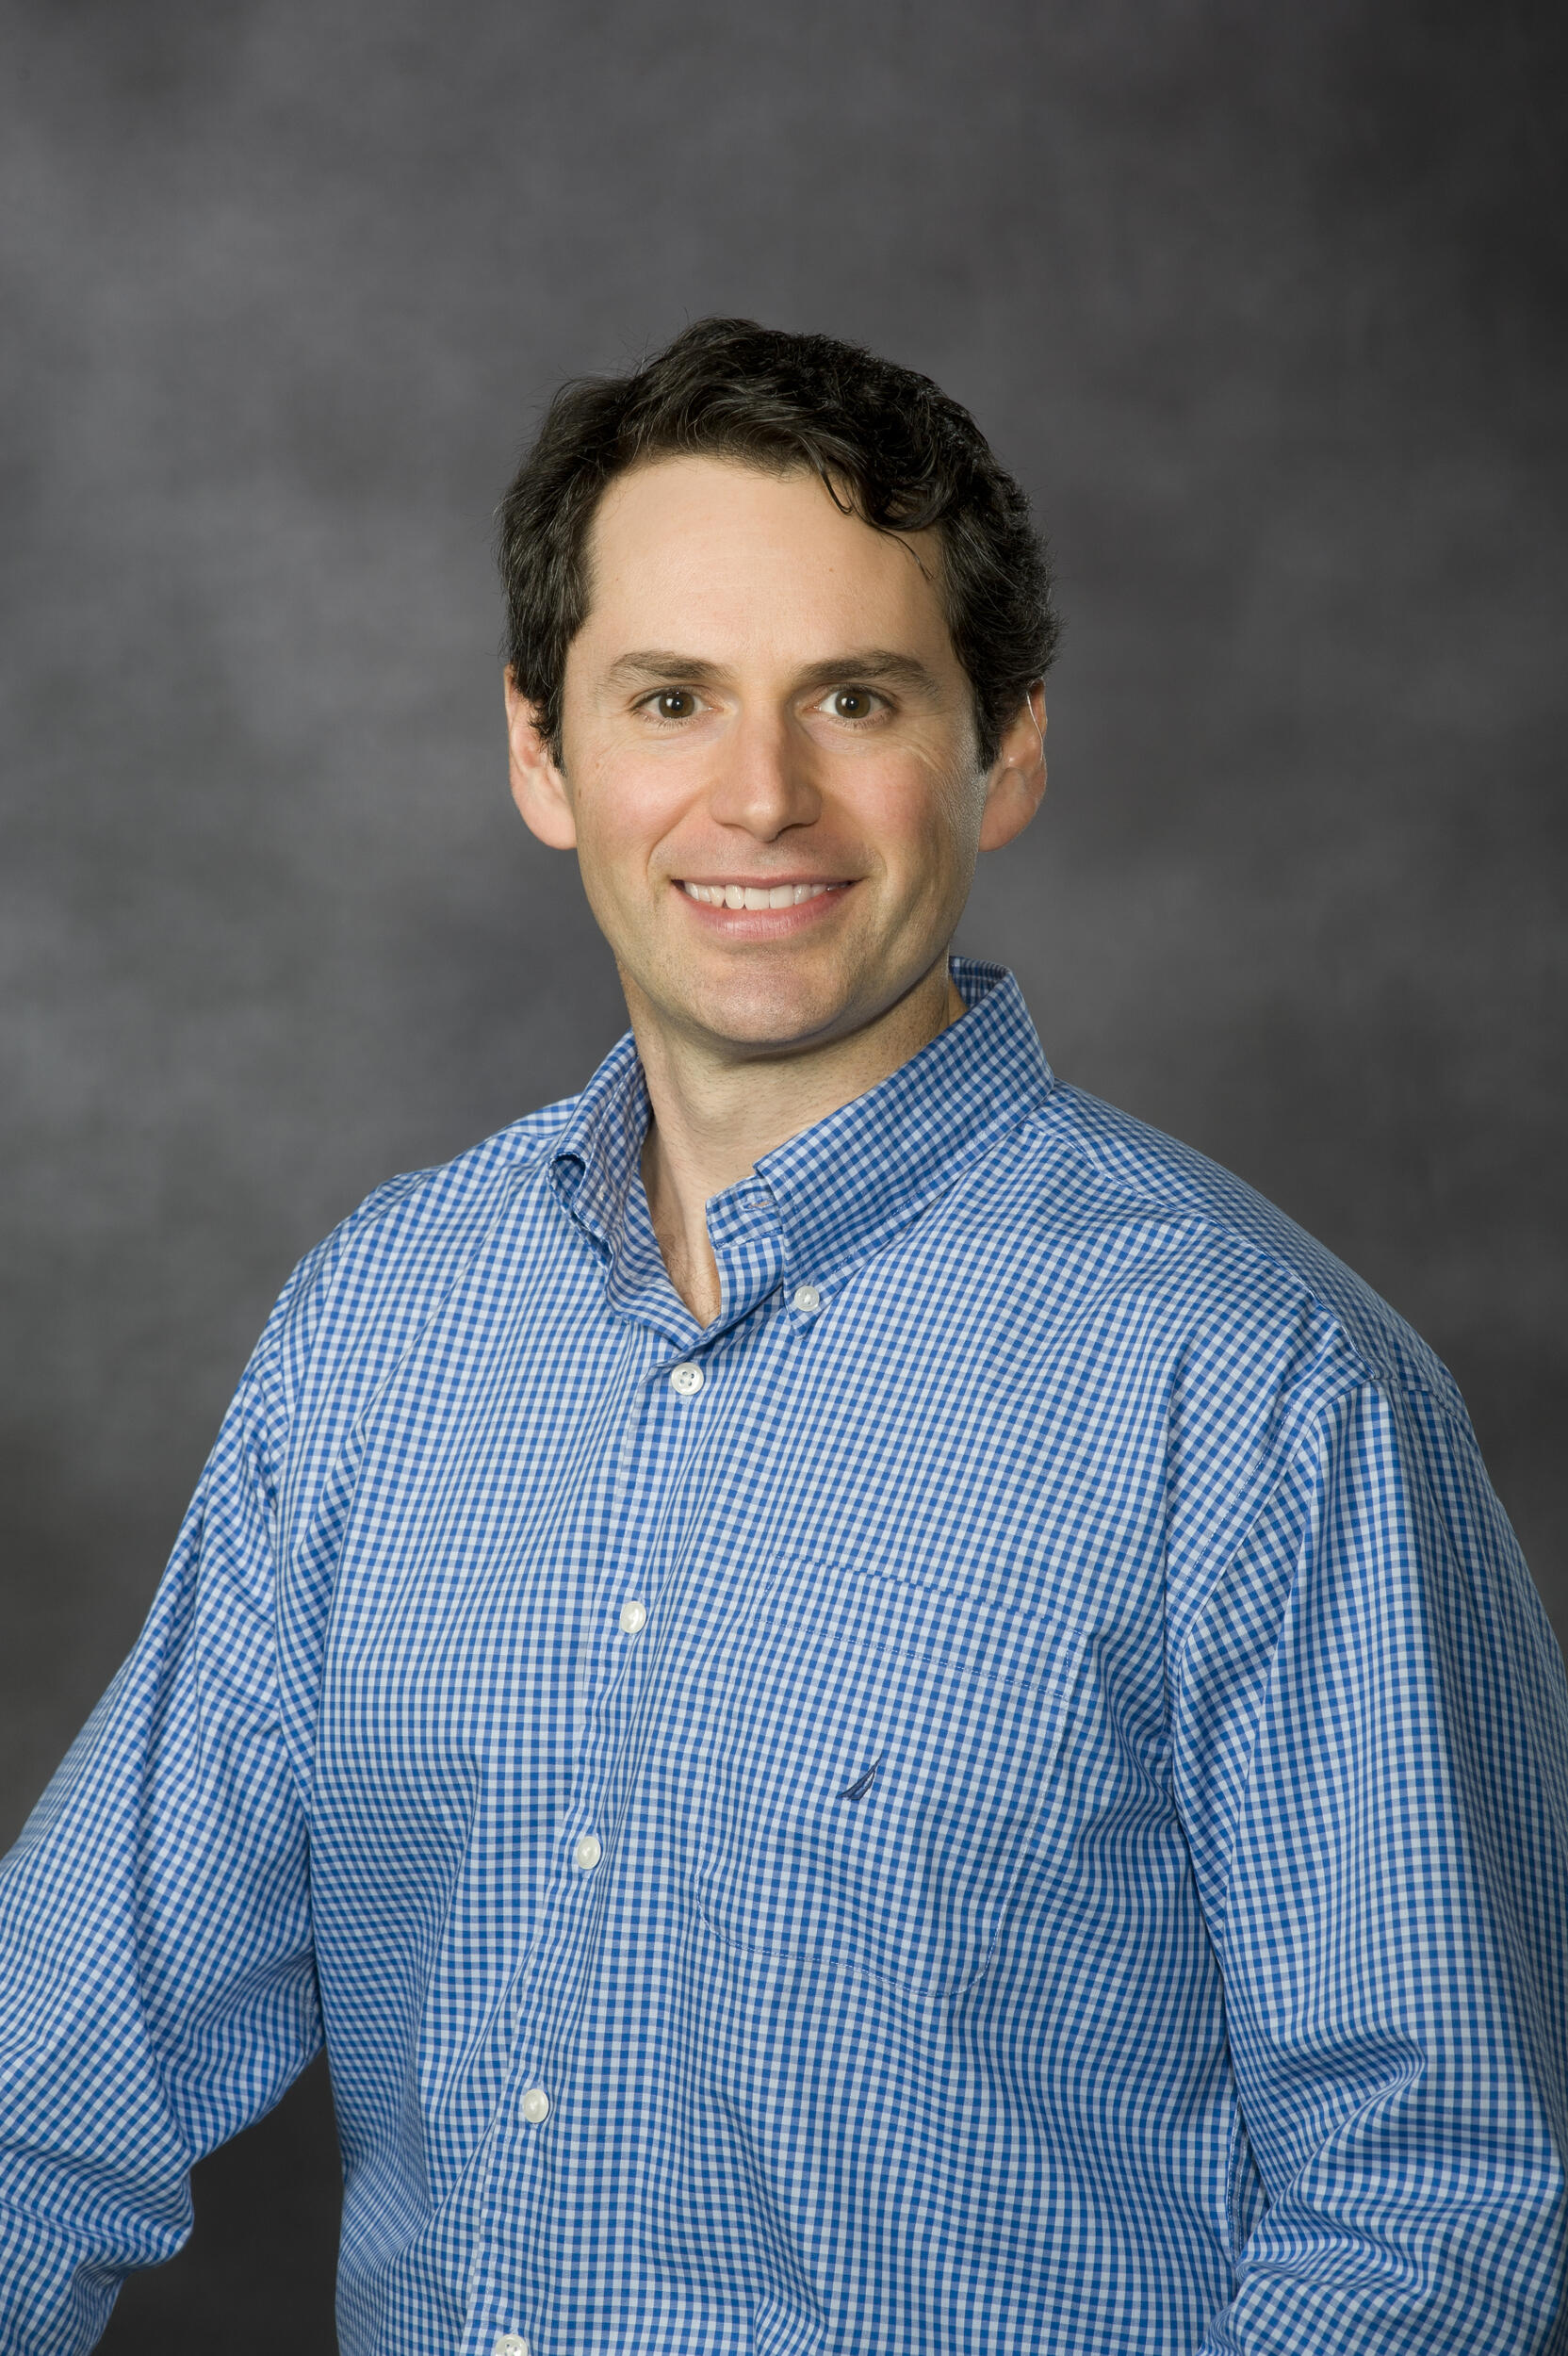 A portrait of William Pelfrey, Ph.D. smiling and wearing a blue button down shirt 